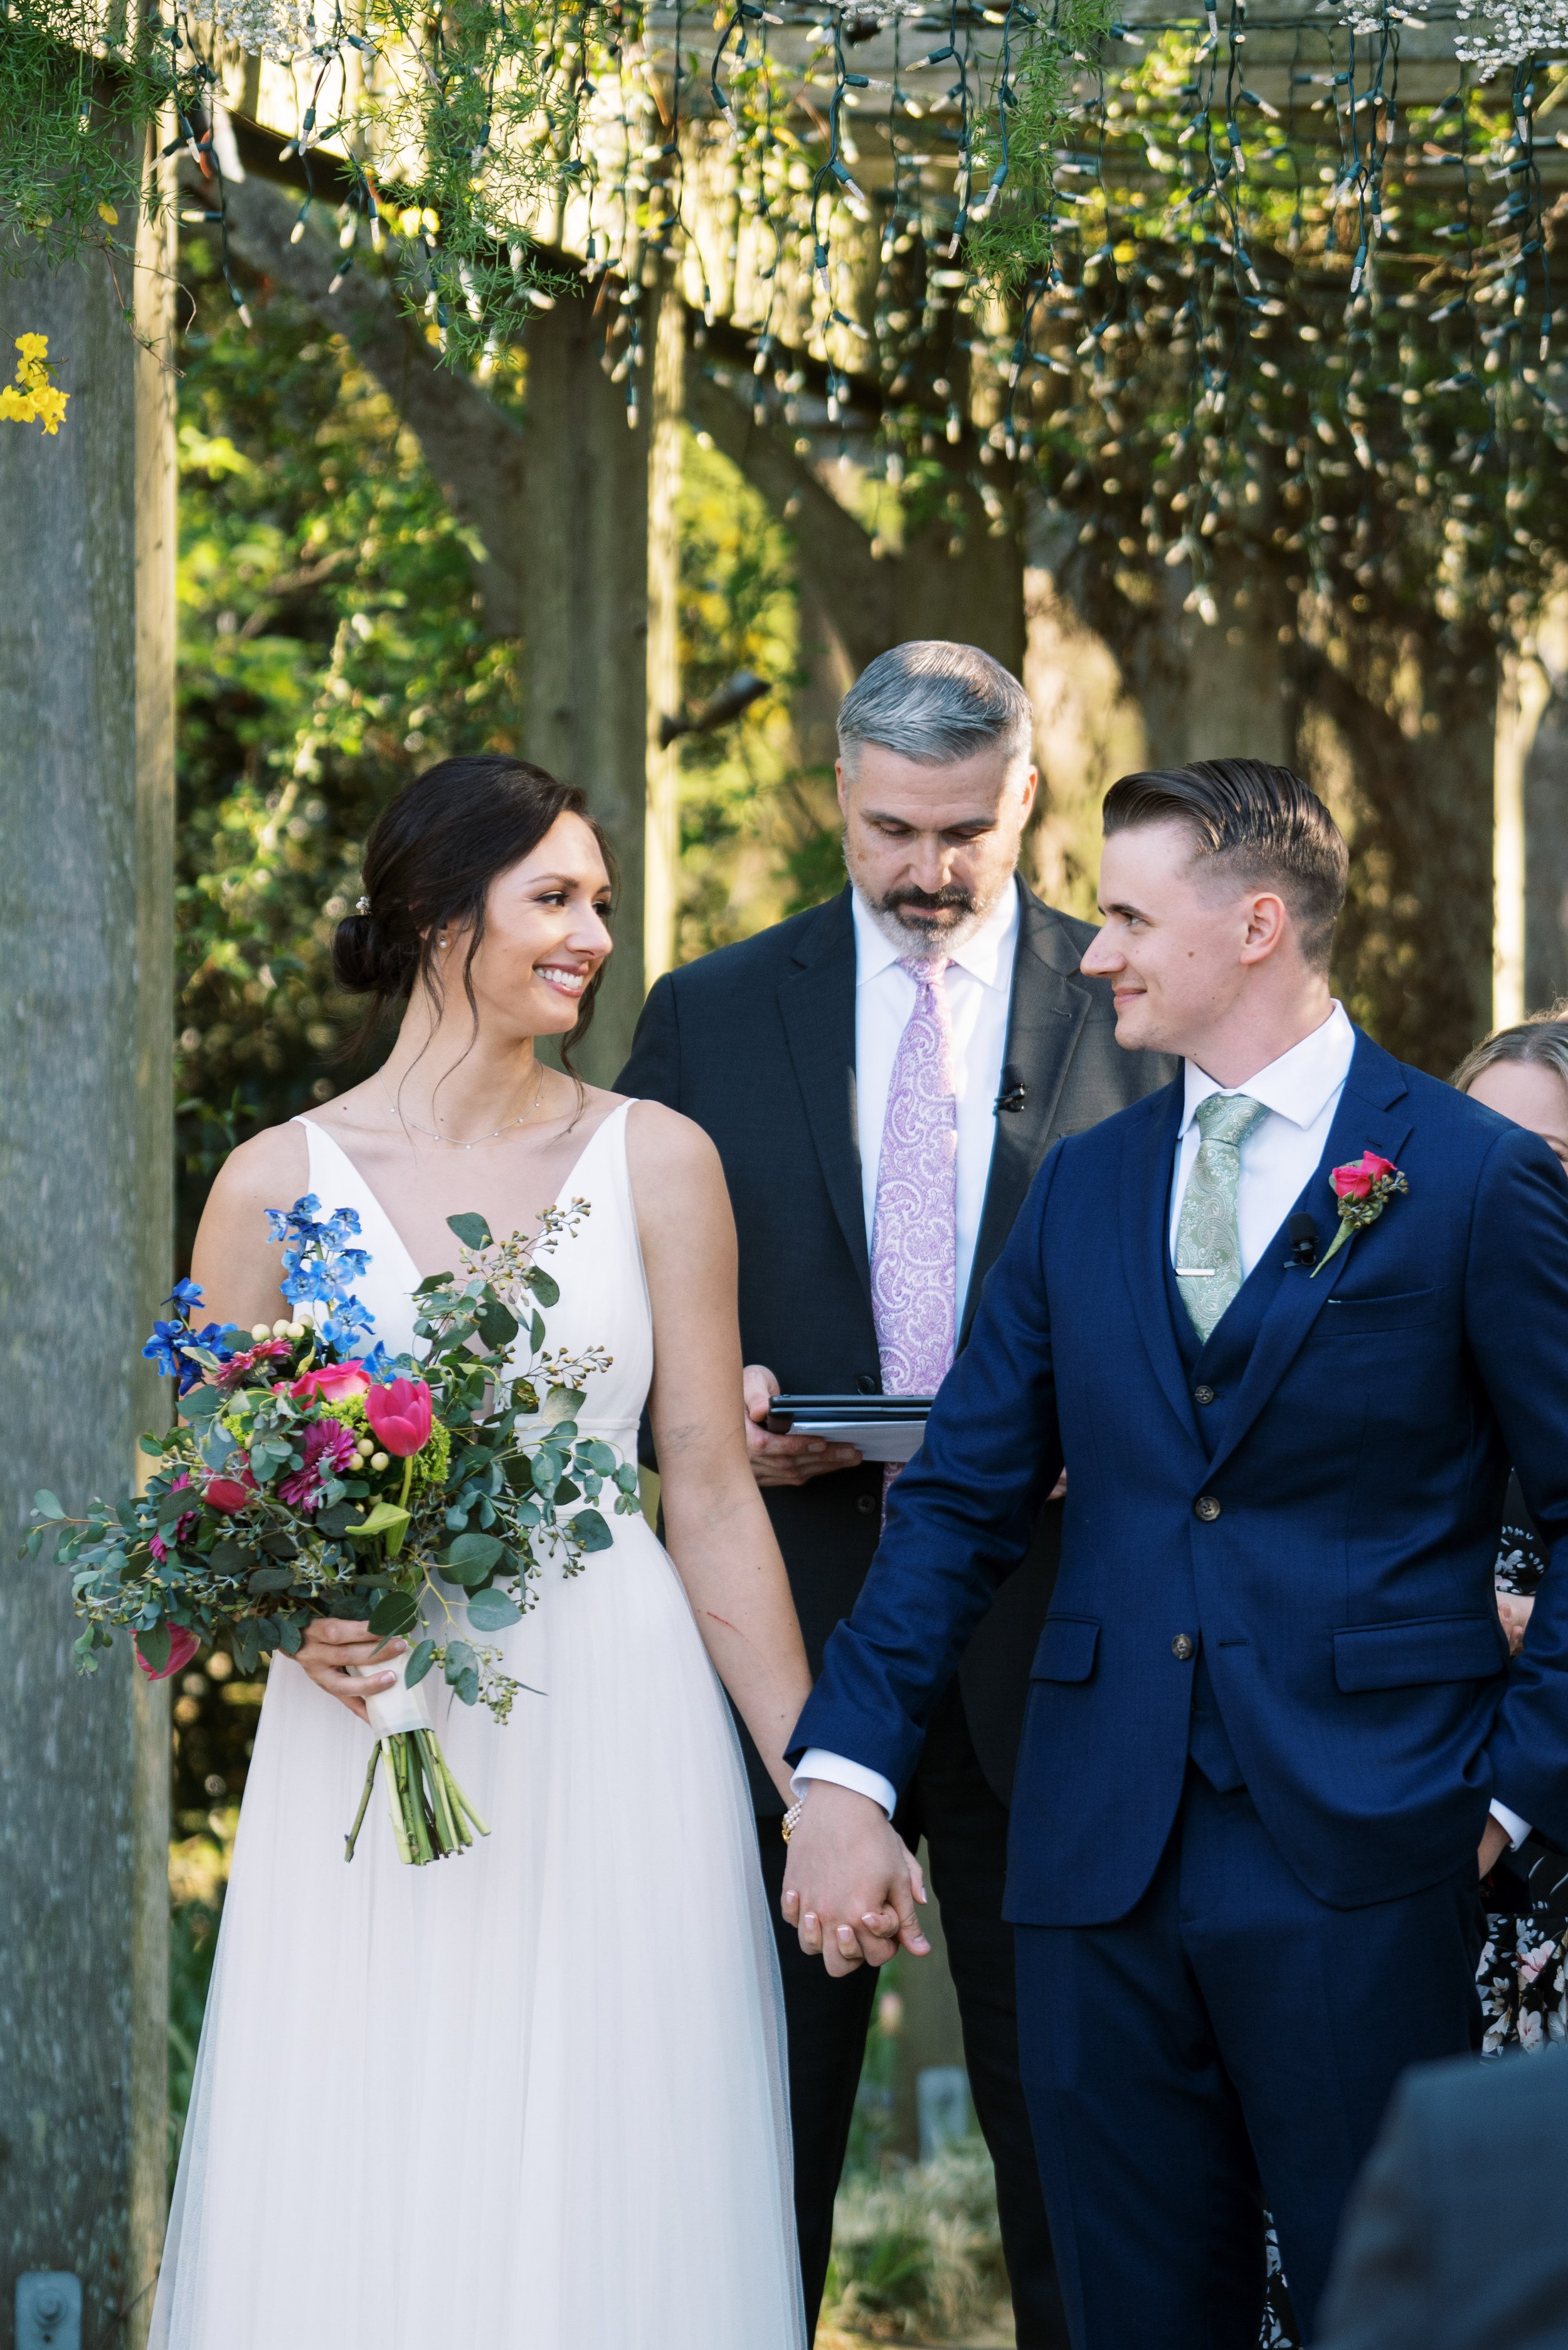 Groom Looks at Bride After Ceremony Vows in Cape Fear Botanical Garden Wedding